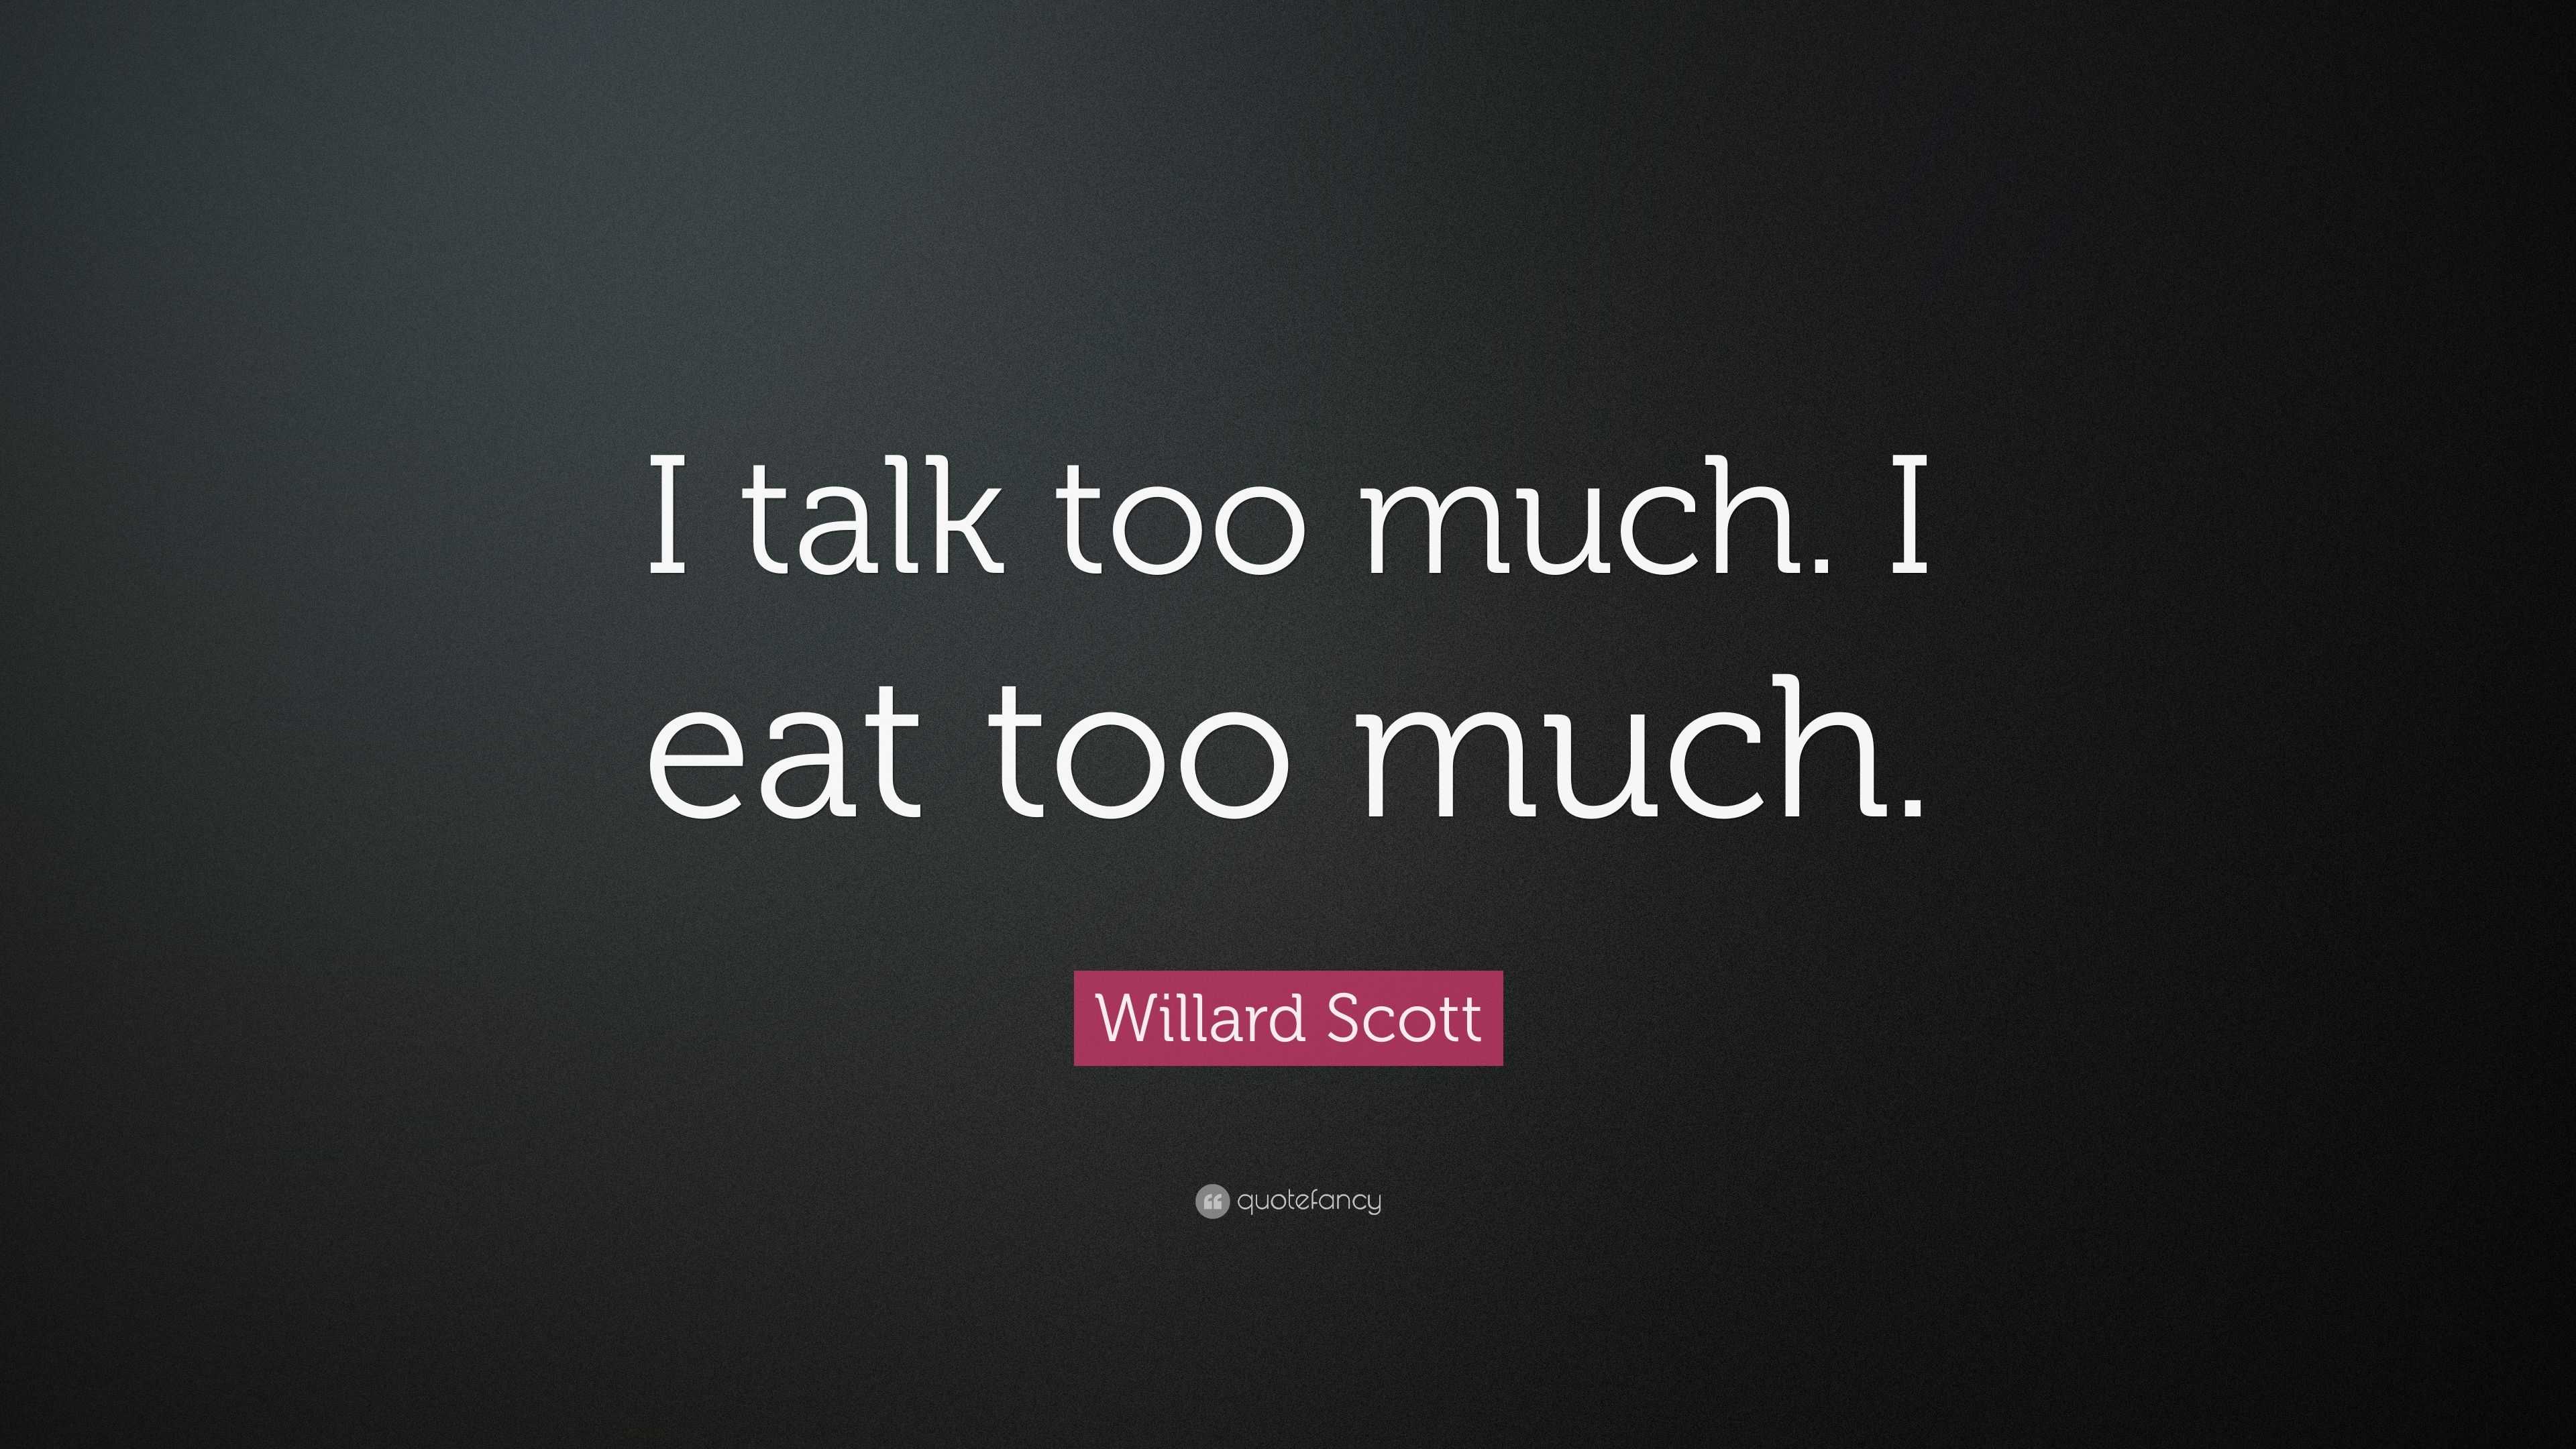 Willard Scott Quote “I talk too much. I eat too much.” (10 wallpapers